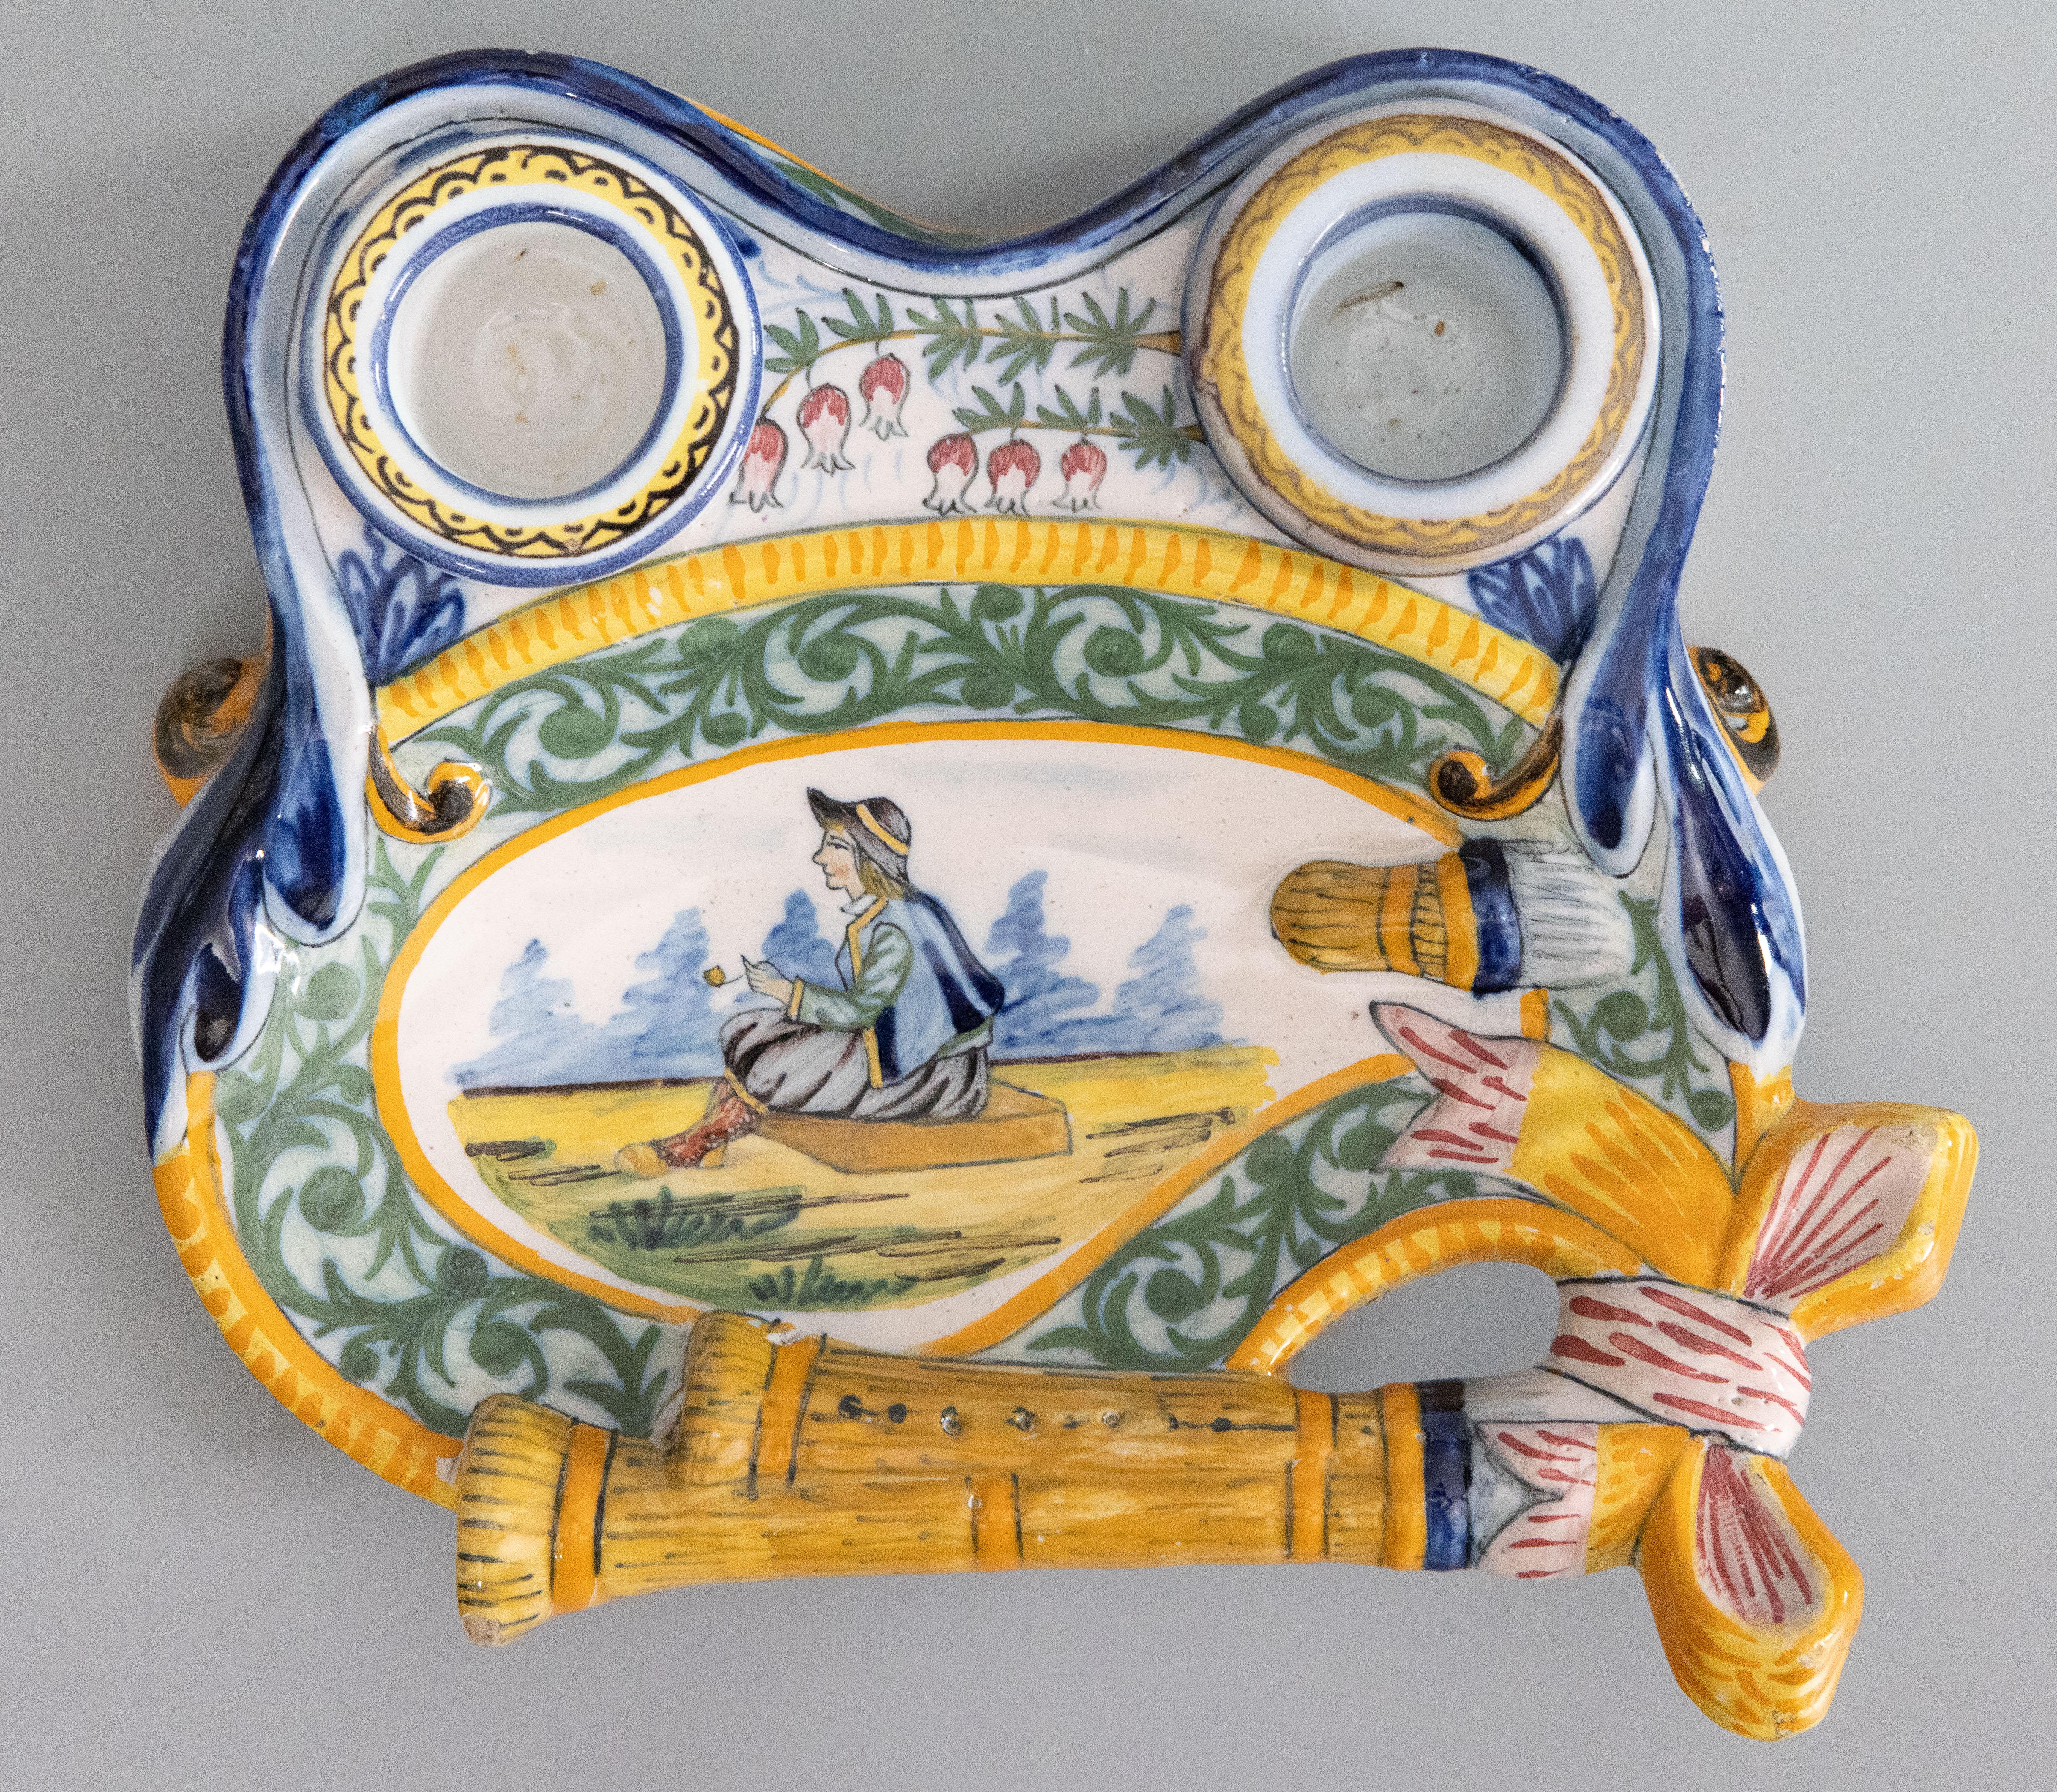 A charming antique French faience Quimper double inkwell and pen tray desk set, circa 1900. This gorgeous inkwell is hand painted with a traditional Breton man surrounded by bagpipes, green foliate scrollwork, and beautiful flowers. It would be a